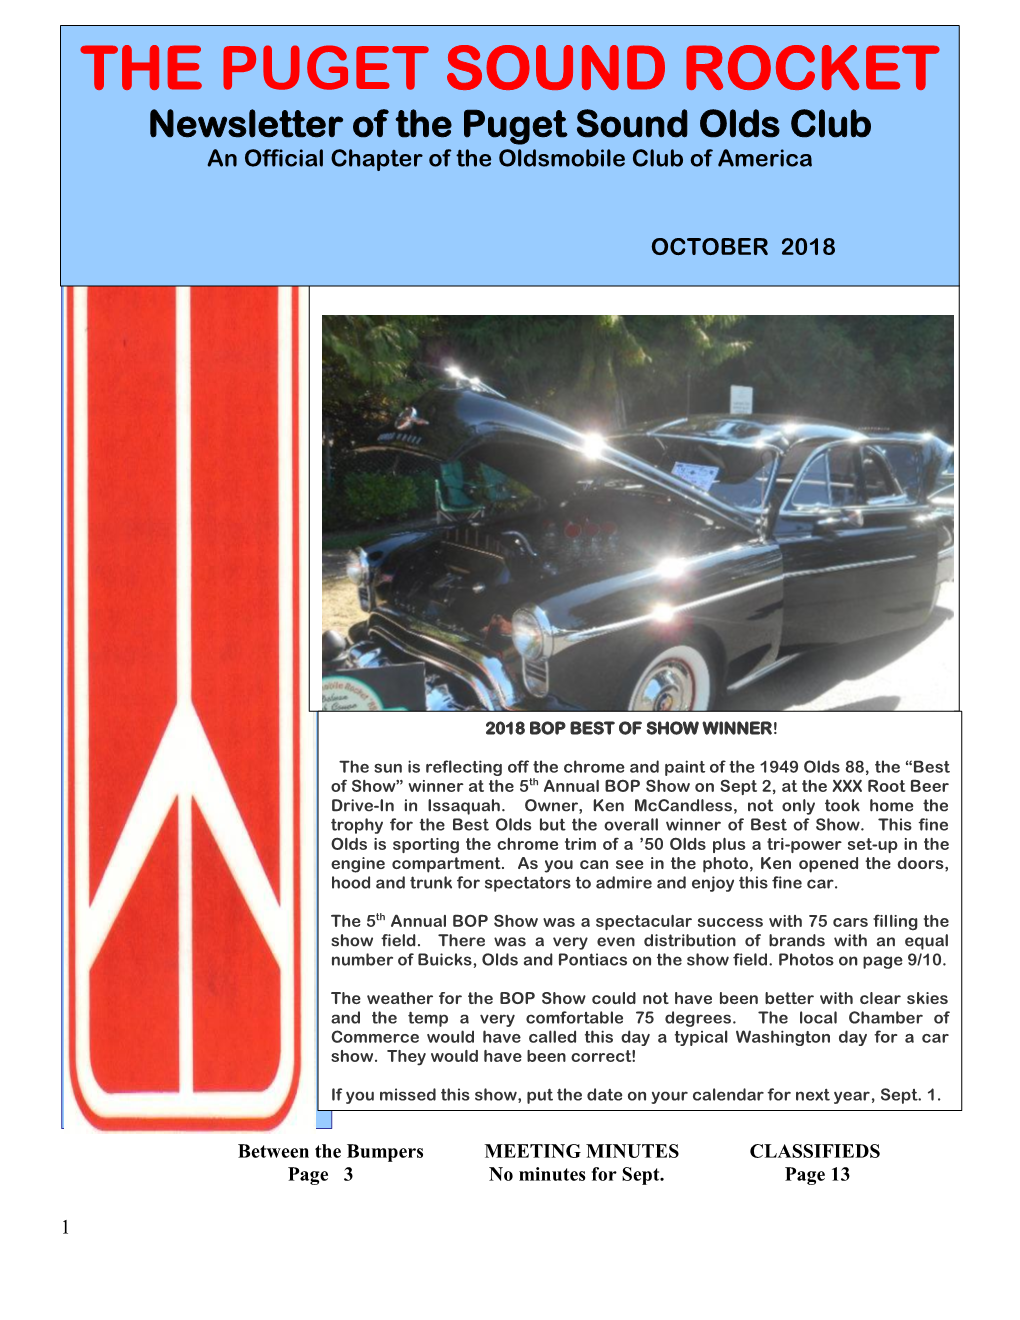 THE PUGET SOUND ROCKET Newsletter of the Puget Sound Olds Club an Official Chapter of the Oldsmobile Club of America